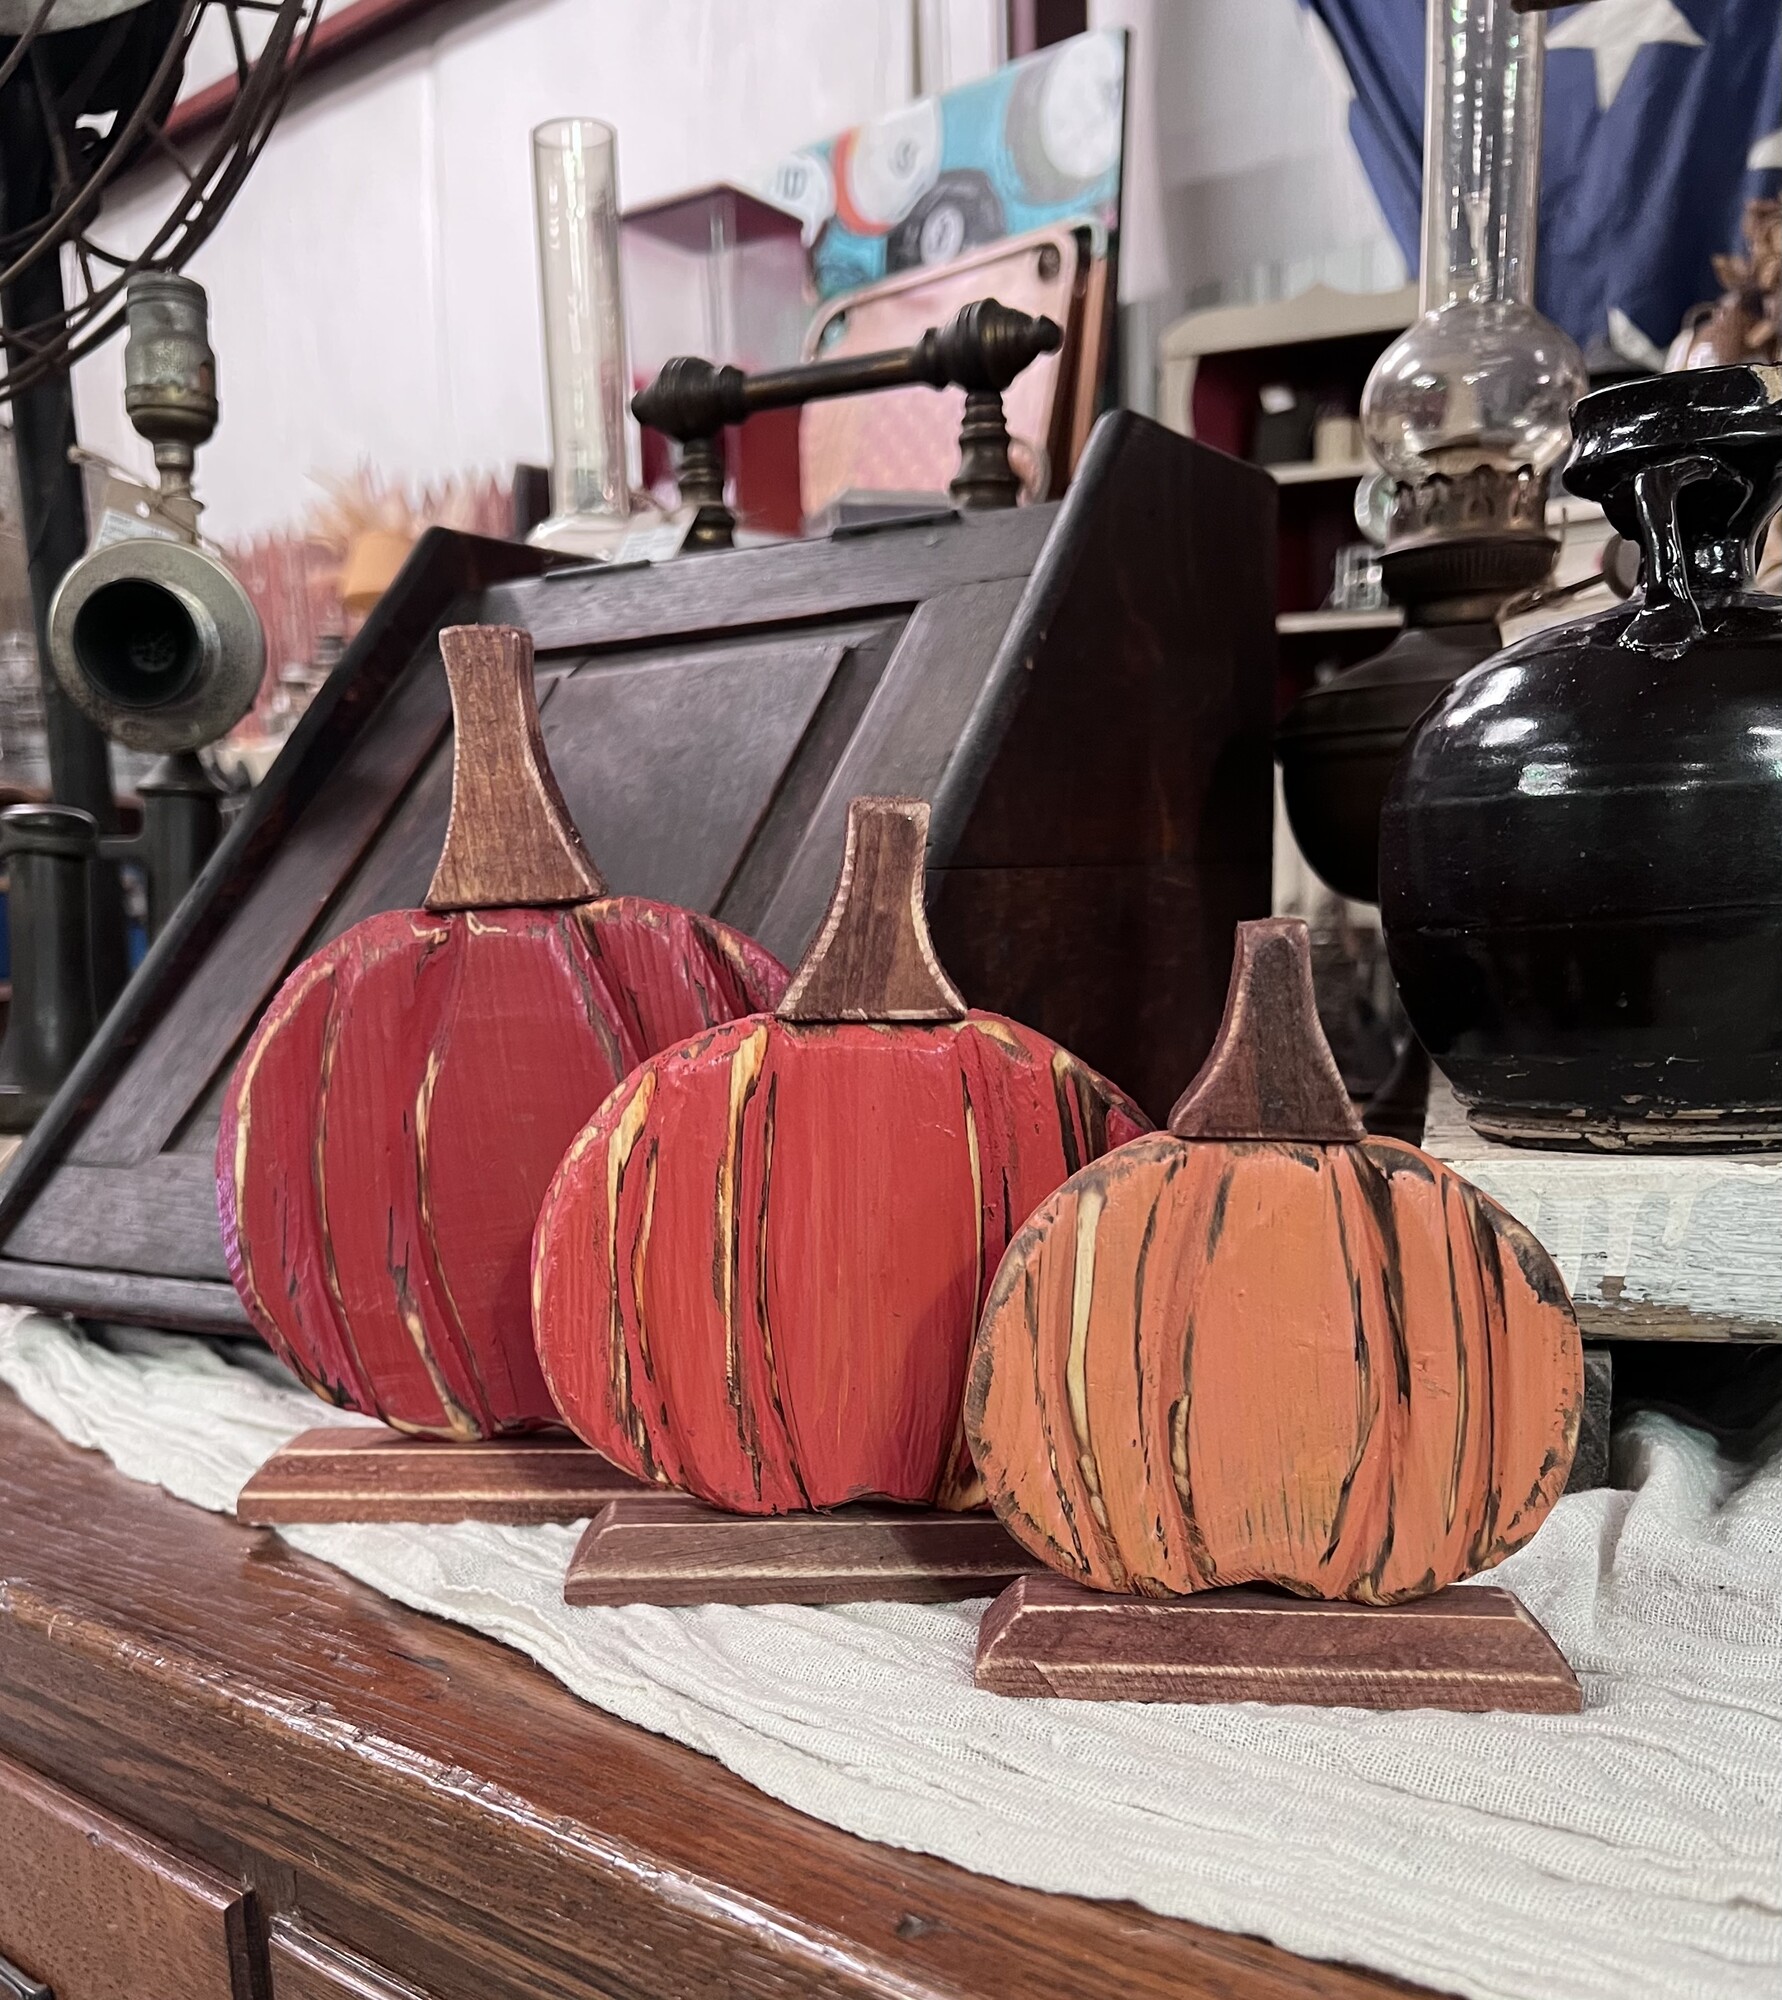 This adorable set of three pumpkins are made of wood and will add nice touch anywhere in your home this fall.
Small measures 5 and half inches tall and 4 inches wide.
Medium measures 6 and a half by 6 inches tall
Large measures 8 inches tall and 6 and half inches wide